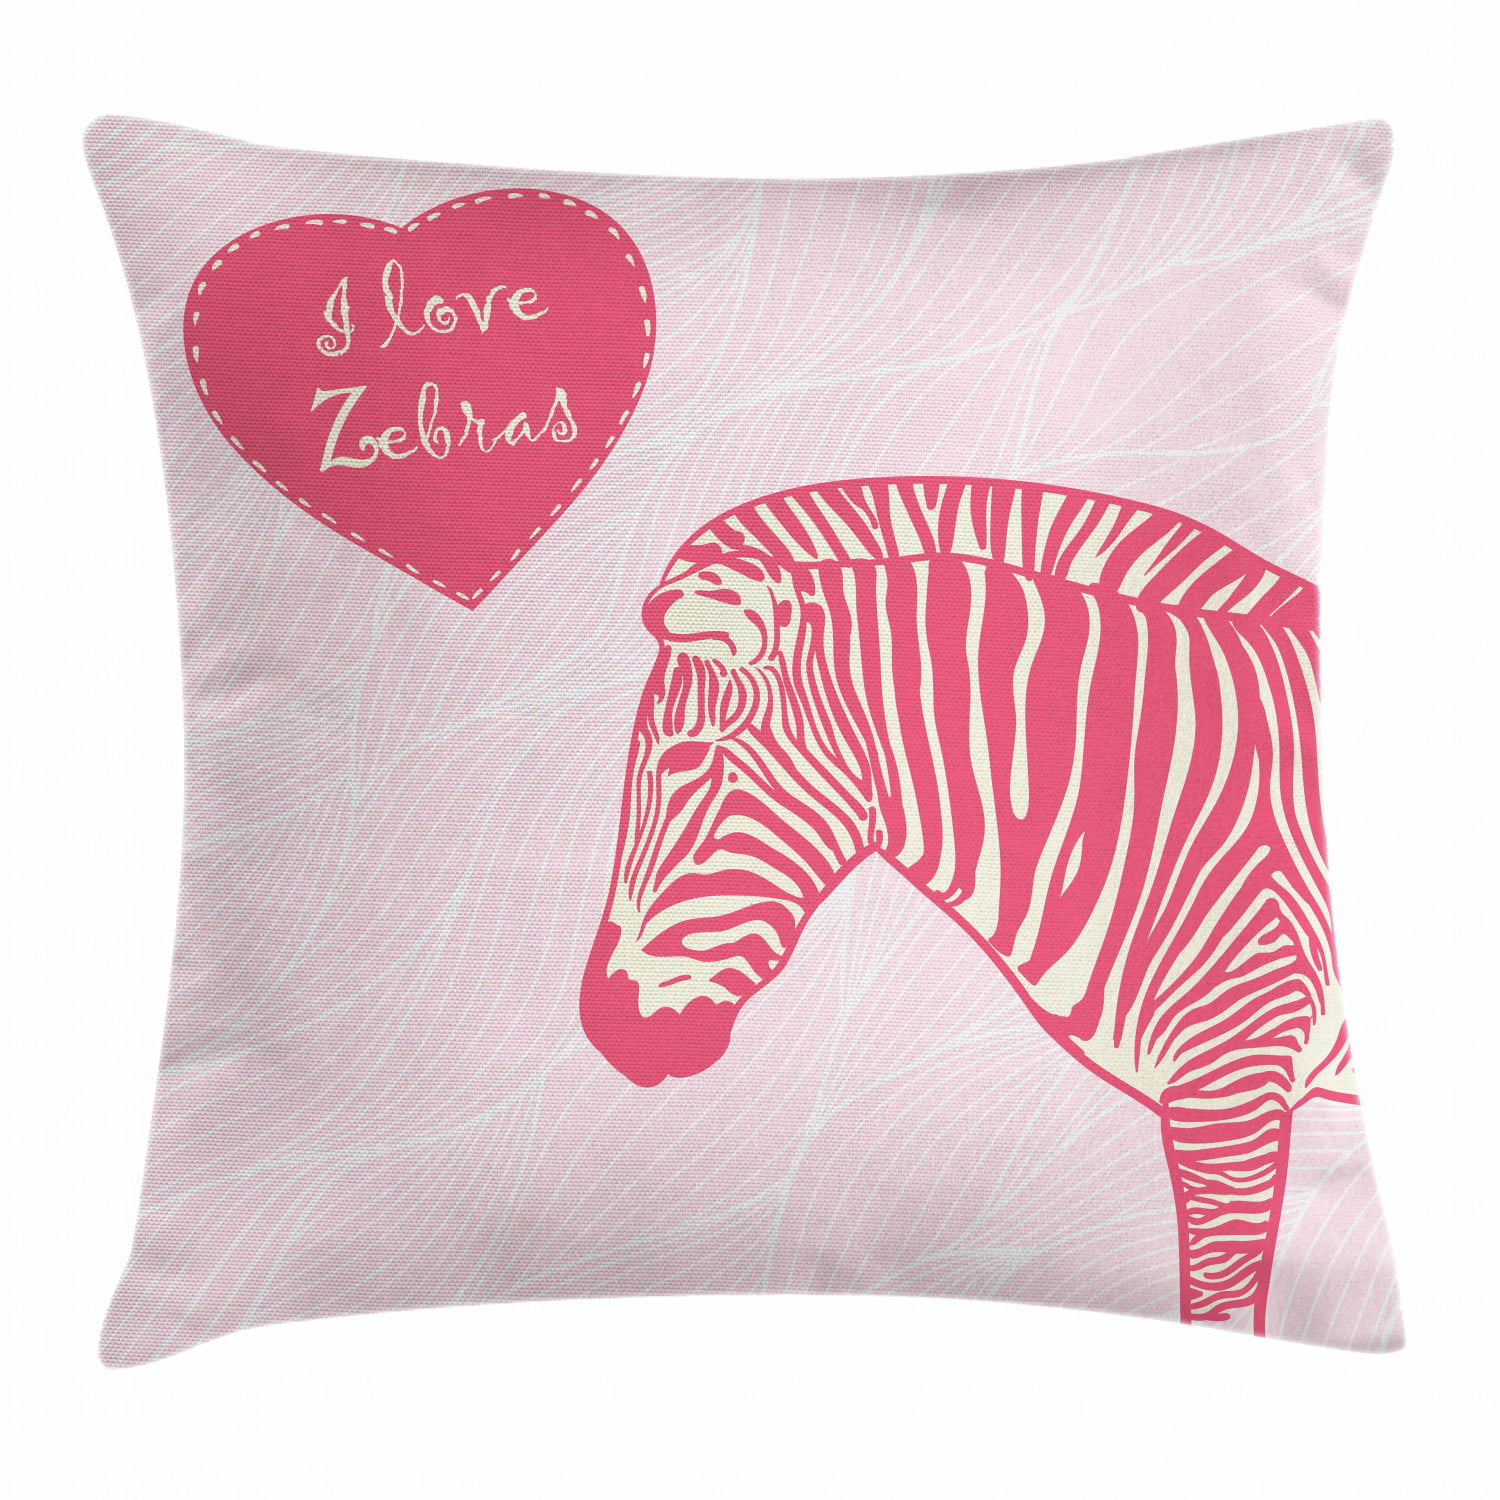 Zippered Reversible Soft Pillow Cover Case Hot Pink and White Zebra Design 